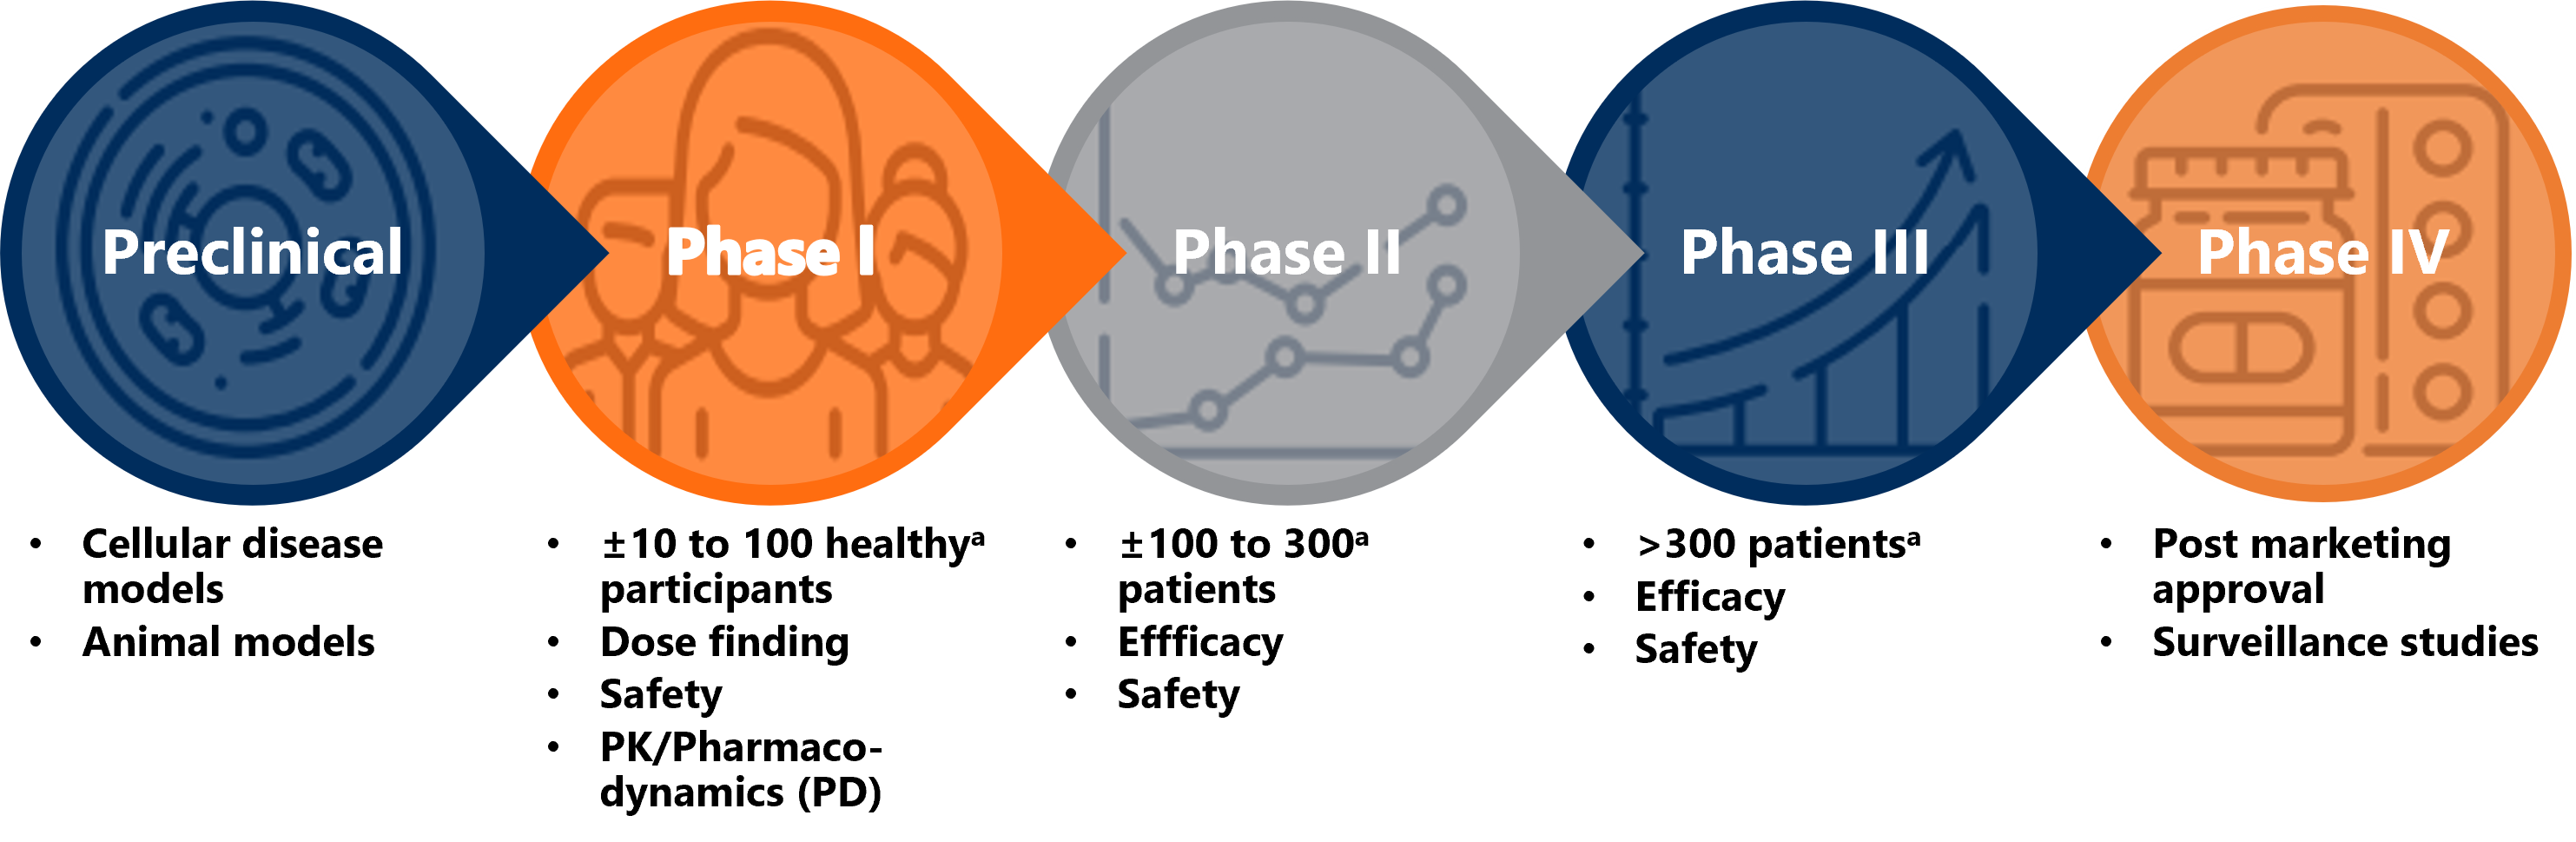 Phases of the Clinical Trial Development